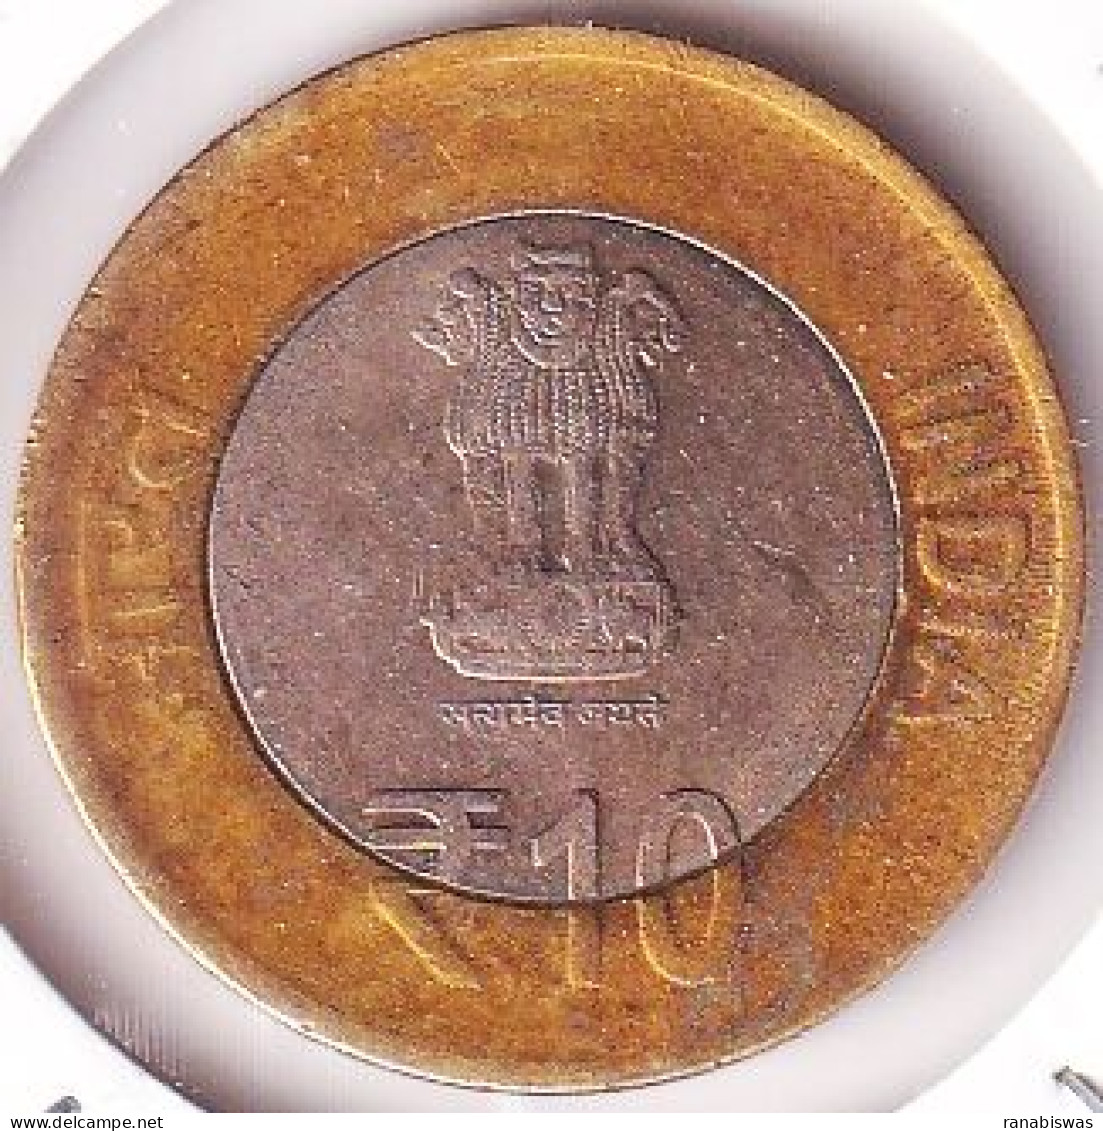 INDIA COIN LOT 446, 10 RUPEES 2013, COIR BOARD, CALCUTTA MINT, XF, SCARE - Inde